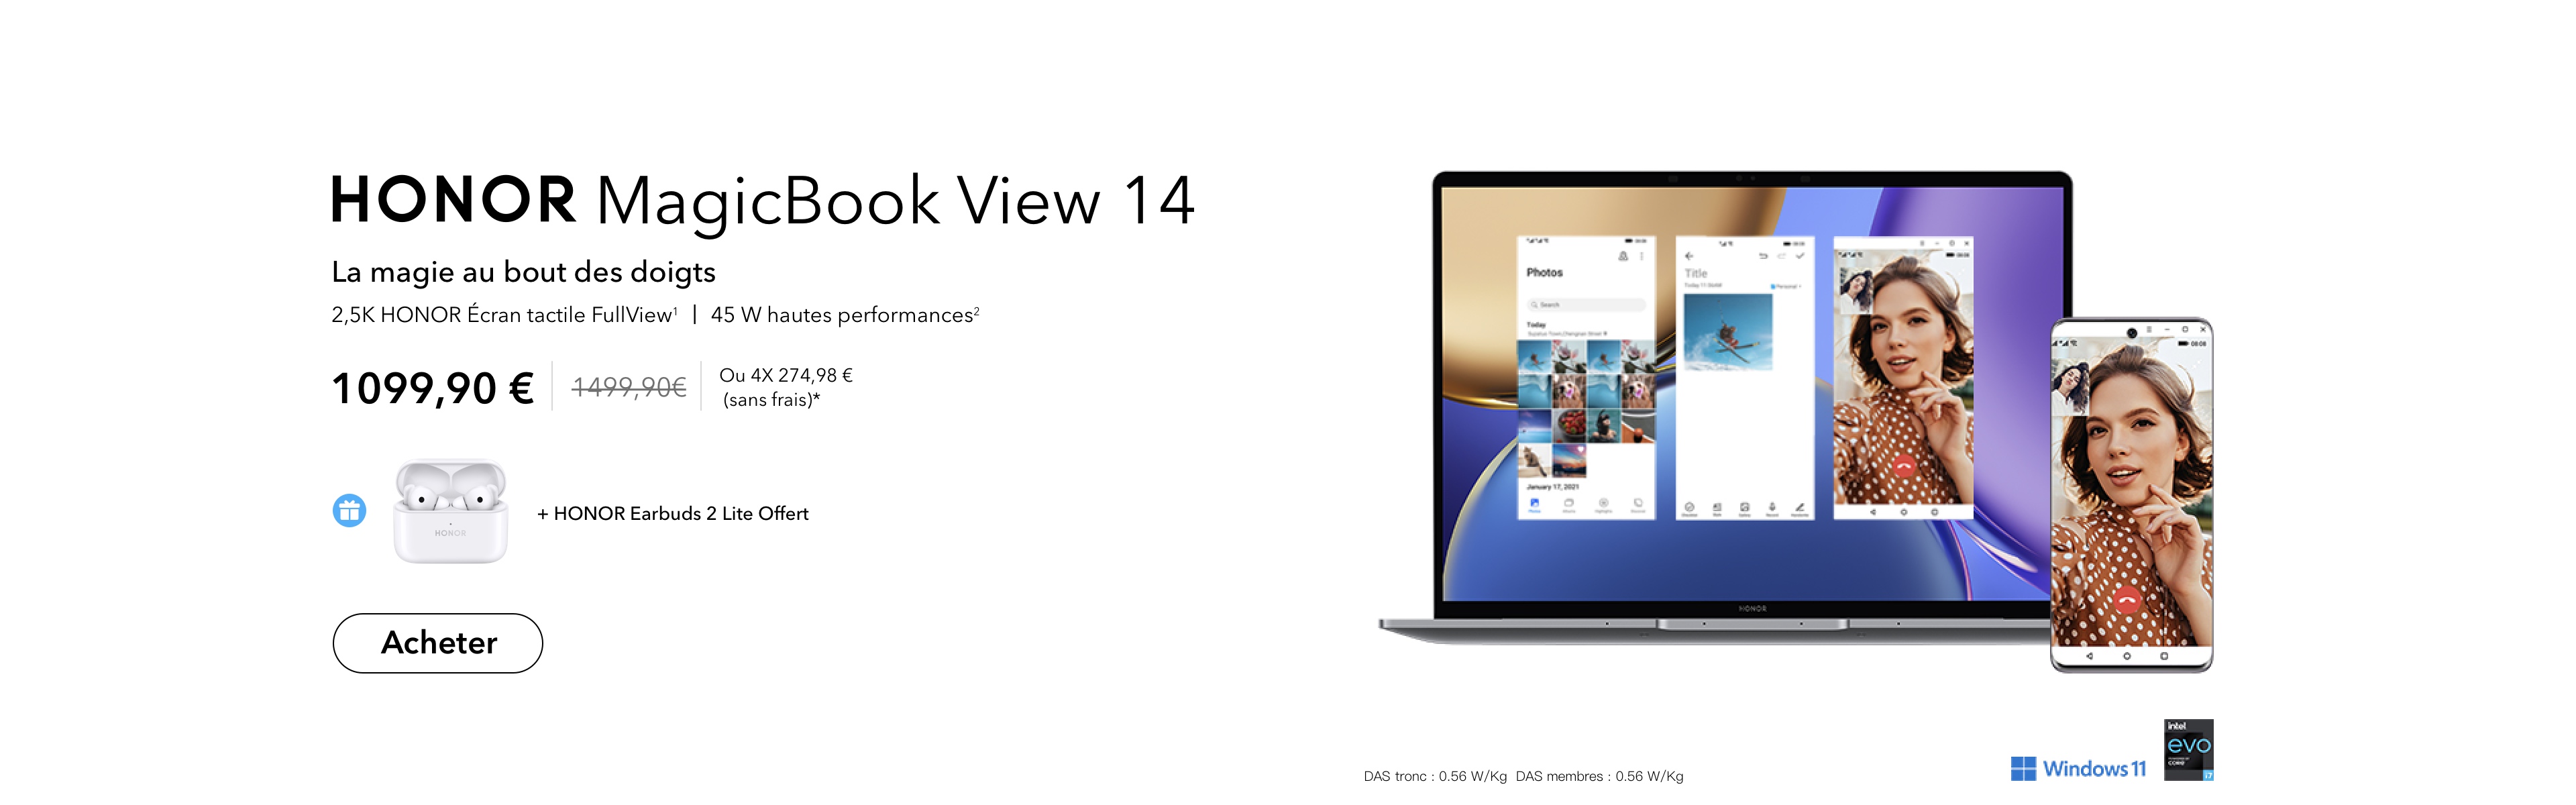 MagicBook View14